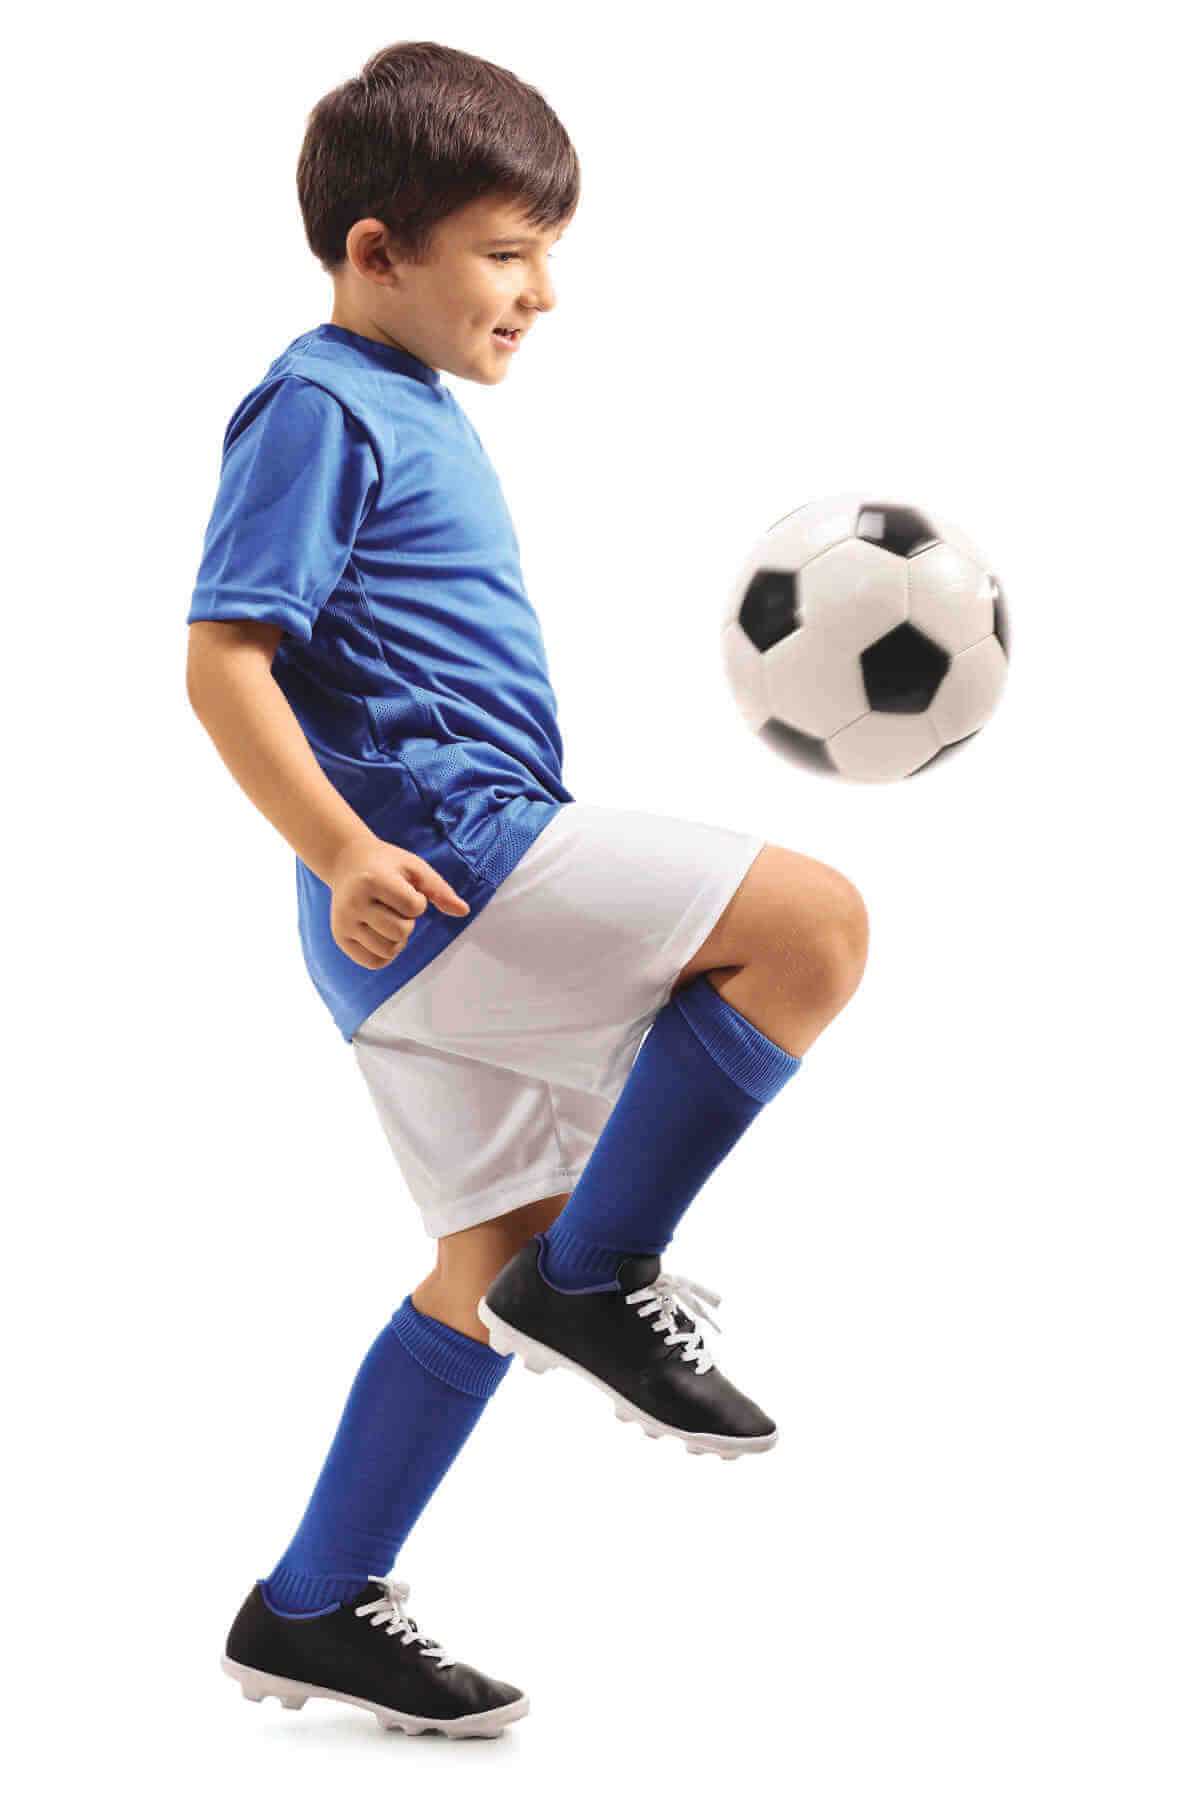 Kids & Sports Injuries on the Rise